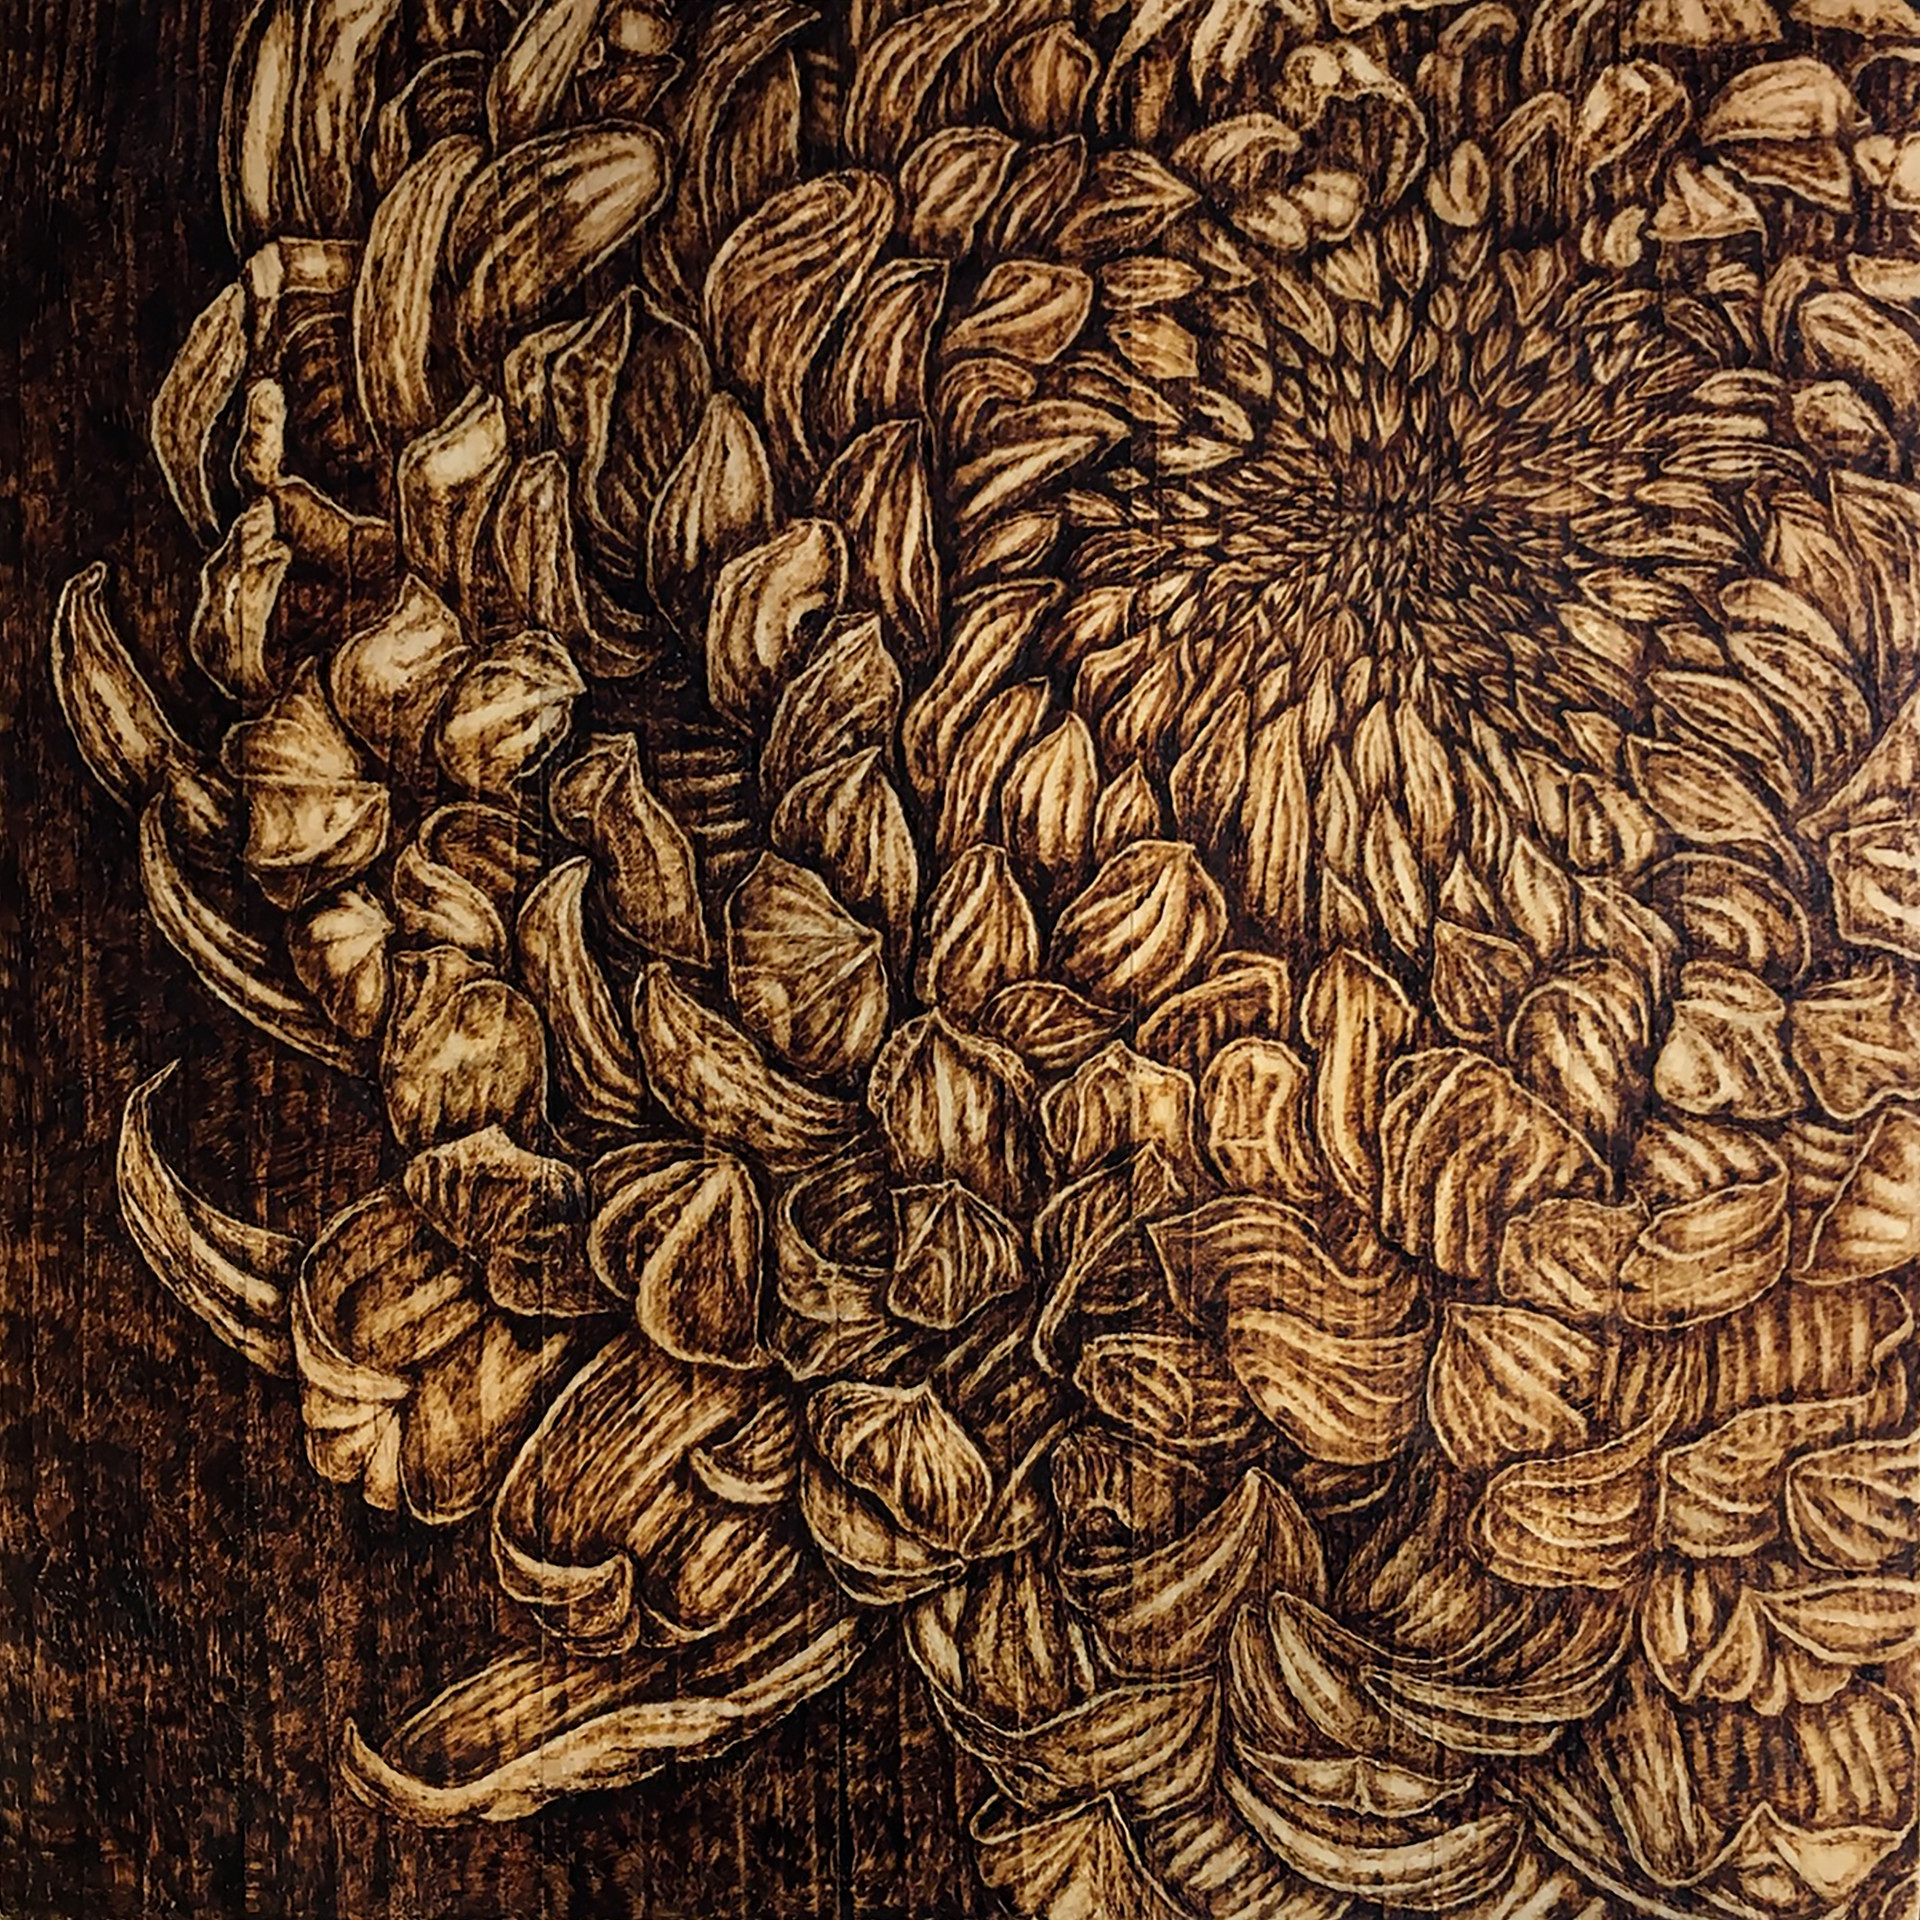 MY MOTHER'S SCENT, Pyrography on Pine 30x30cm, 2021